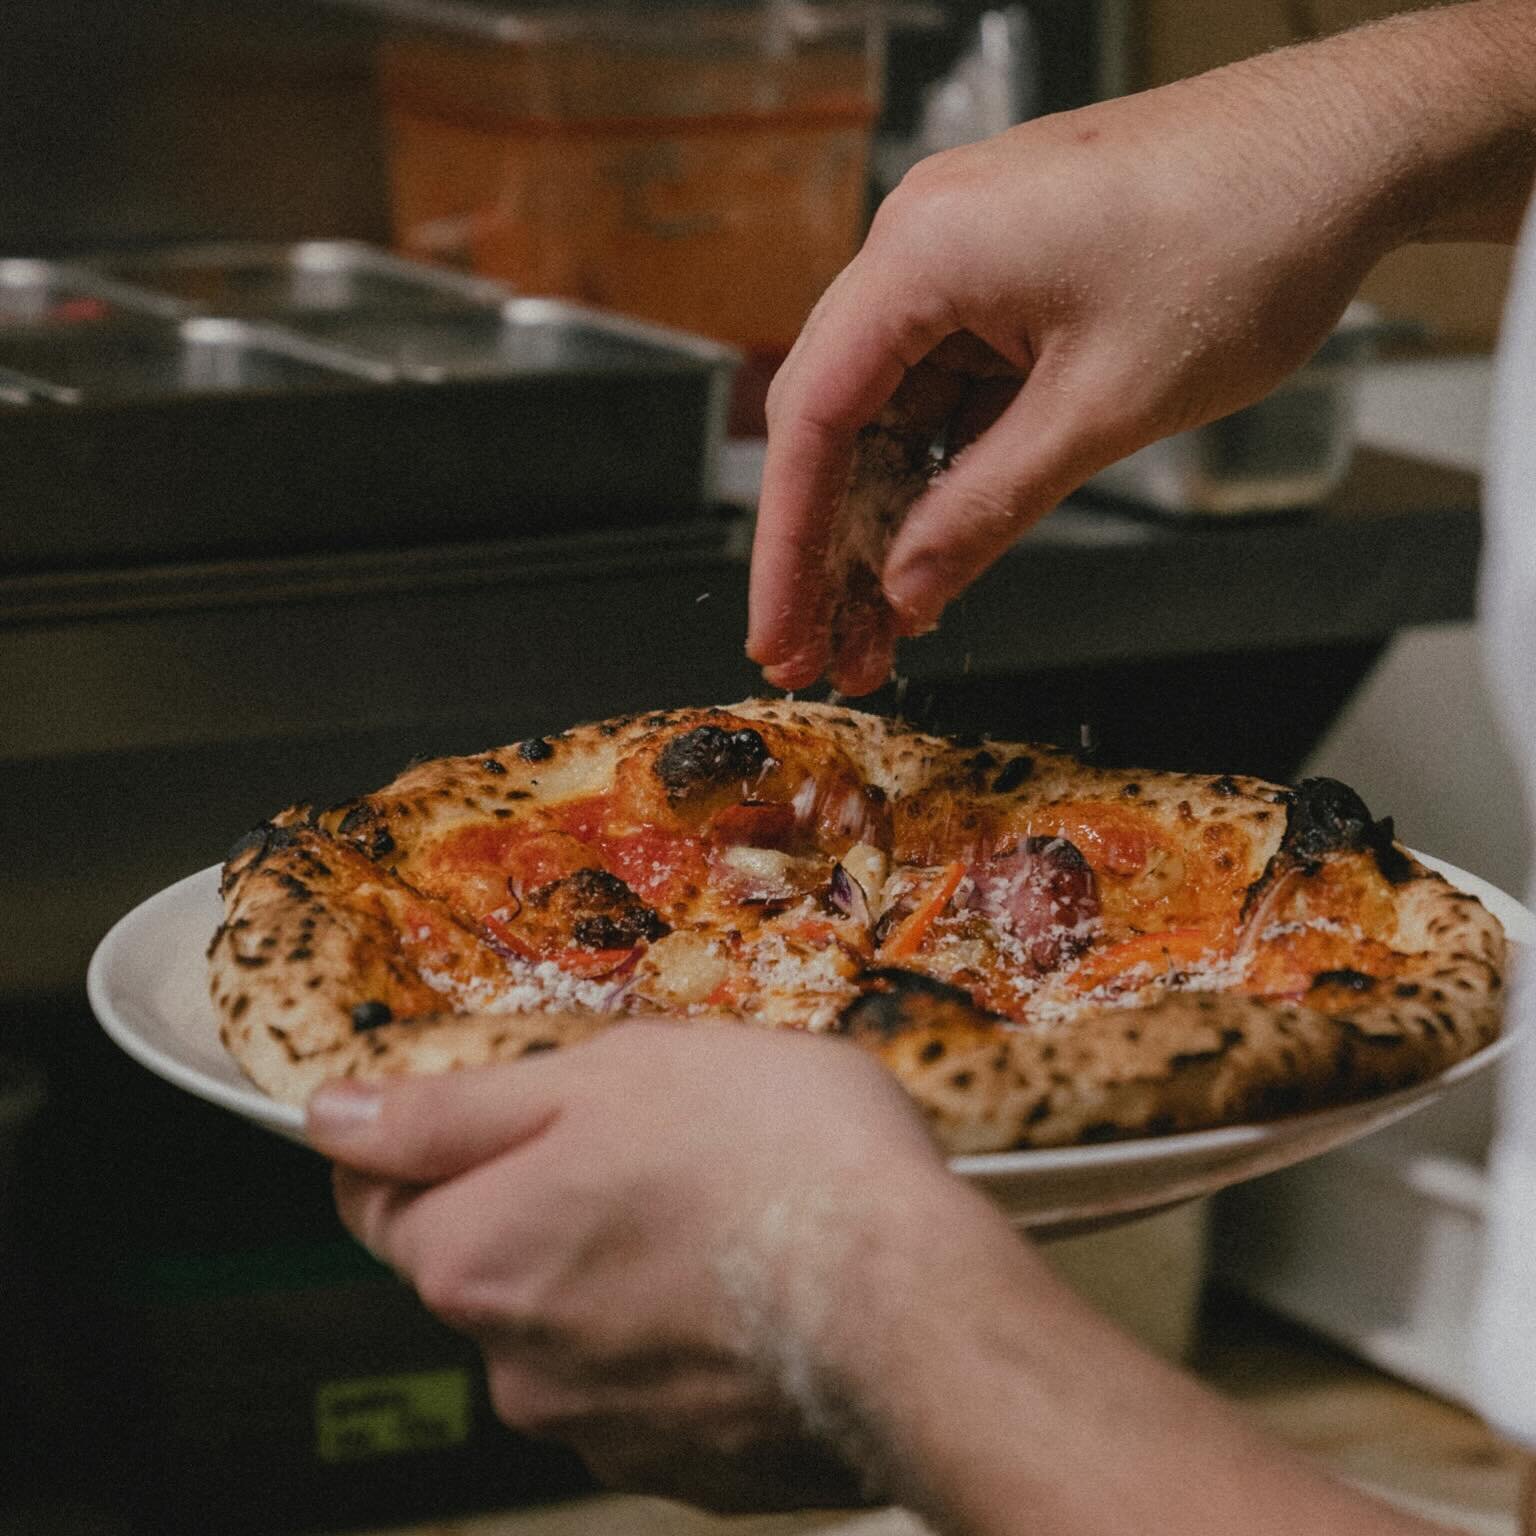 In crust we trust. Hand-stretched on 72-hr fermented dough. Slice to meet you indulge in one of our pizzas this week starting Wednesday 5pm.
Reservations recommended walk-ins welcomed!
Give us a call or book online! Your table awaits